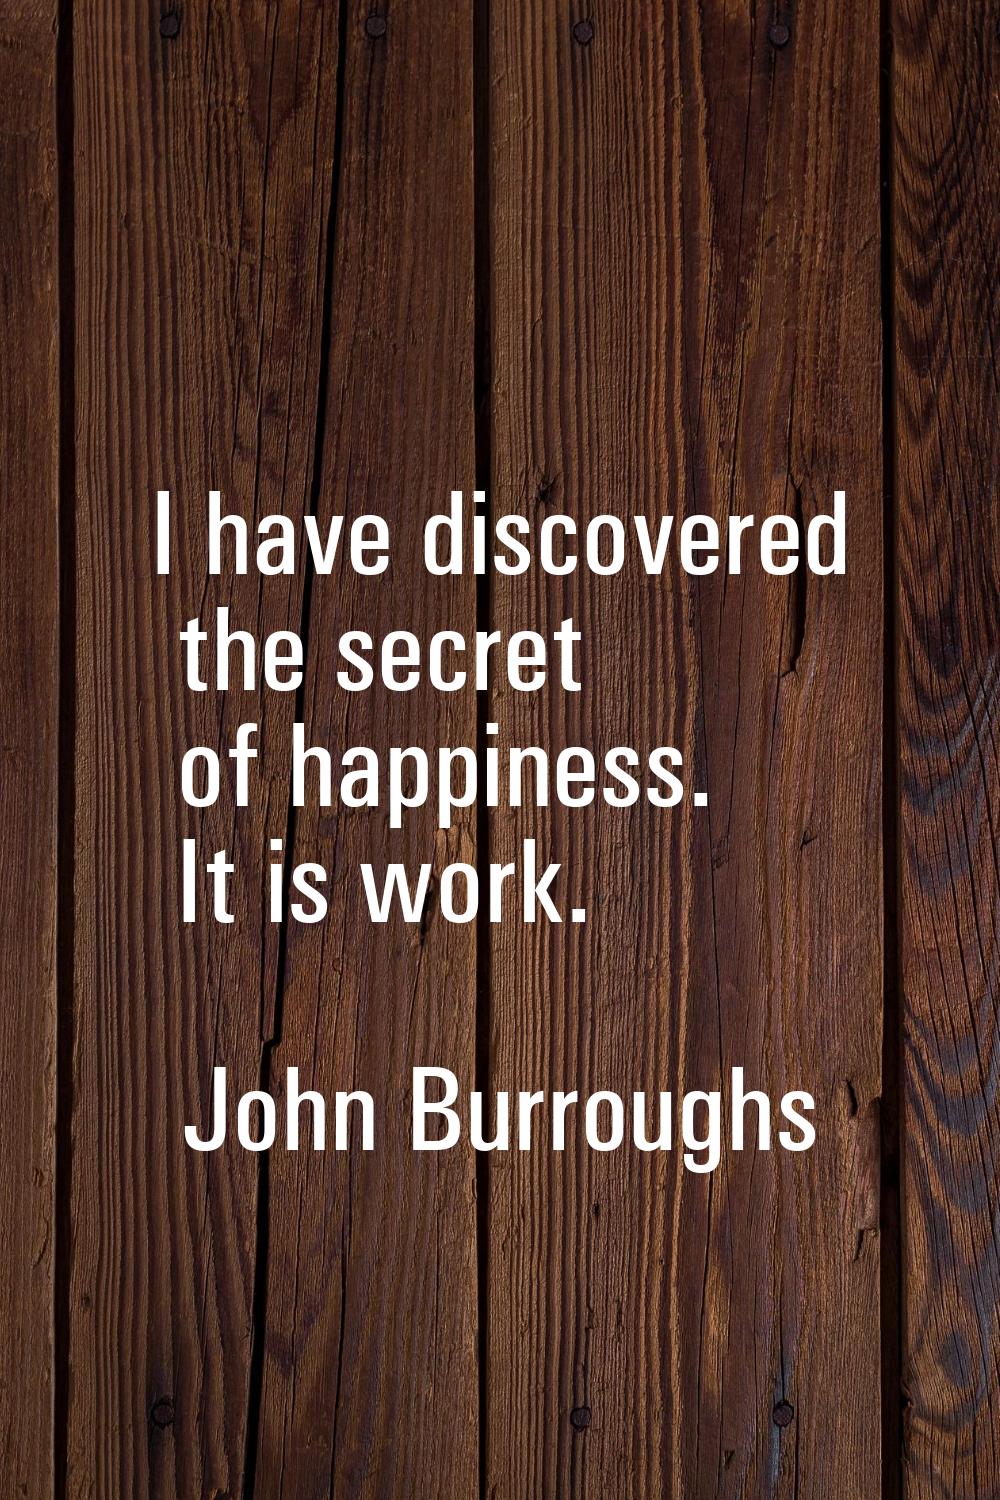 I have discovered the secret of happiness. It is work.